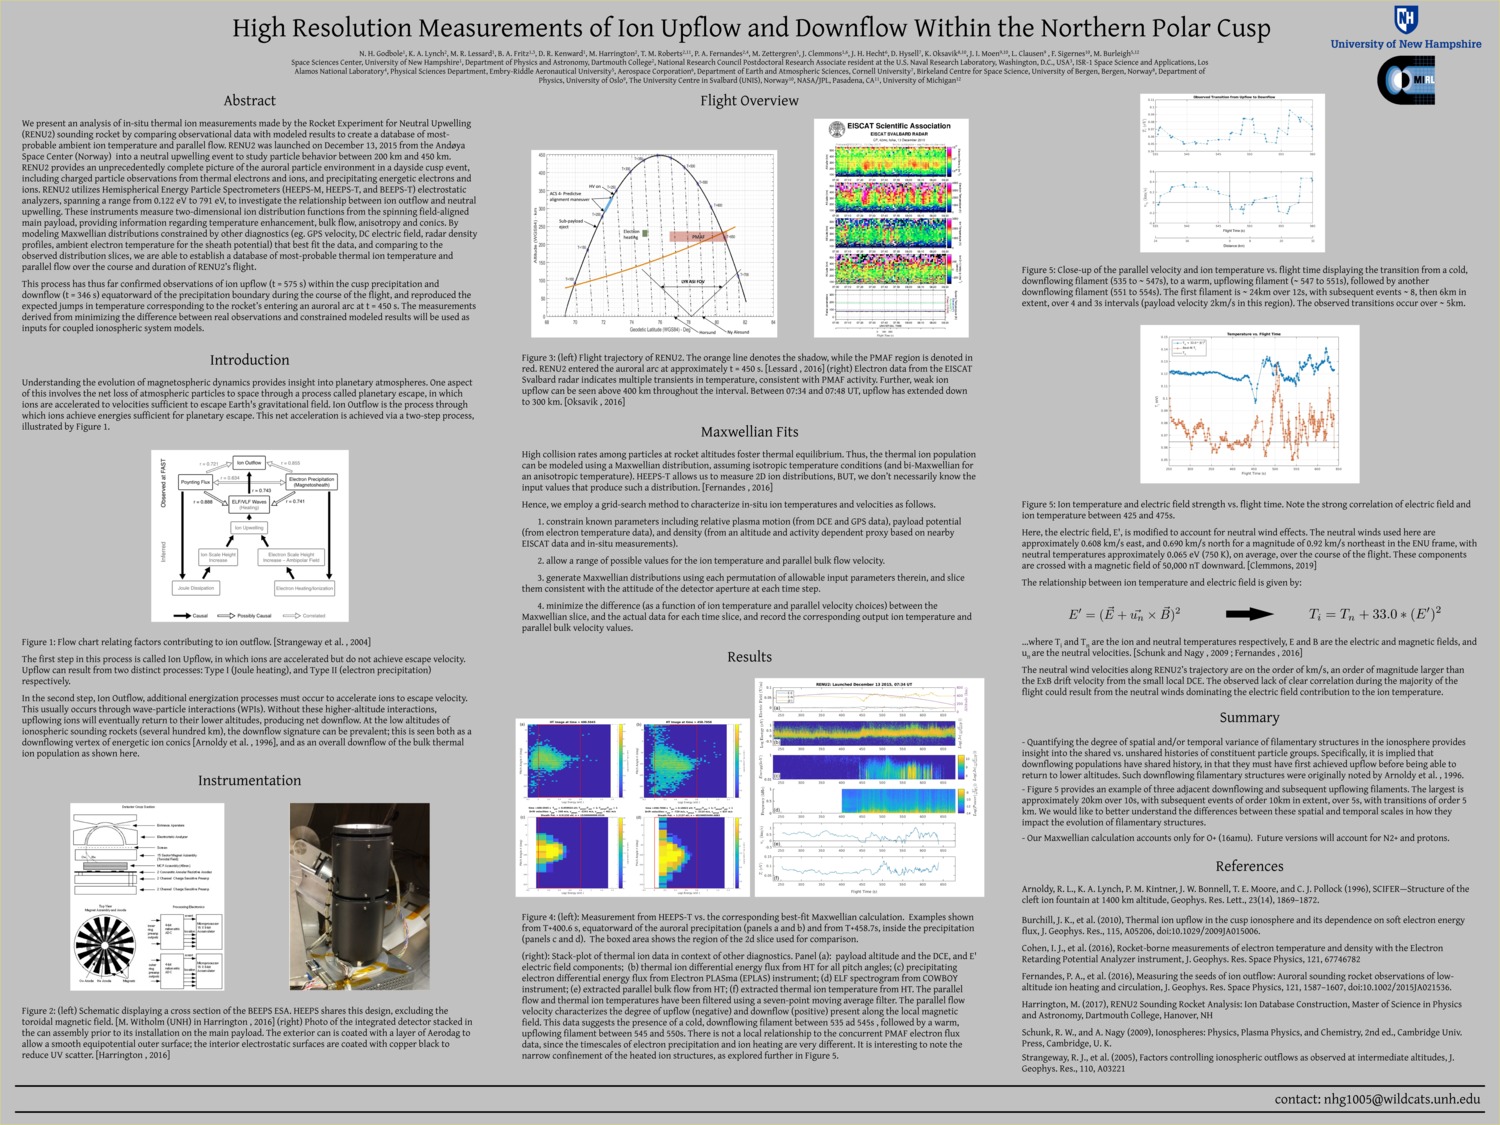 High Resolution Measurements Of Ion Upflow And Downflow Within The Northern Polar Cusp by nhg1005